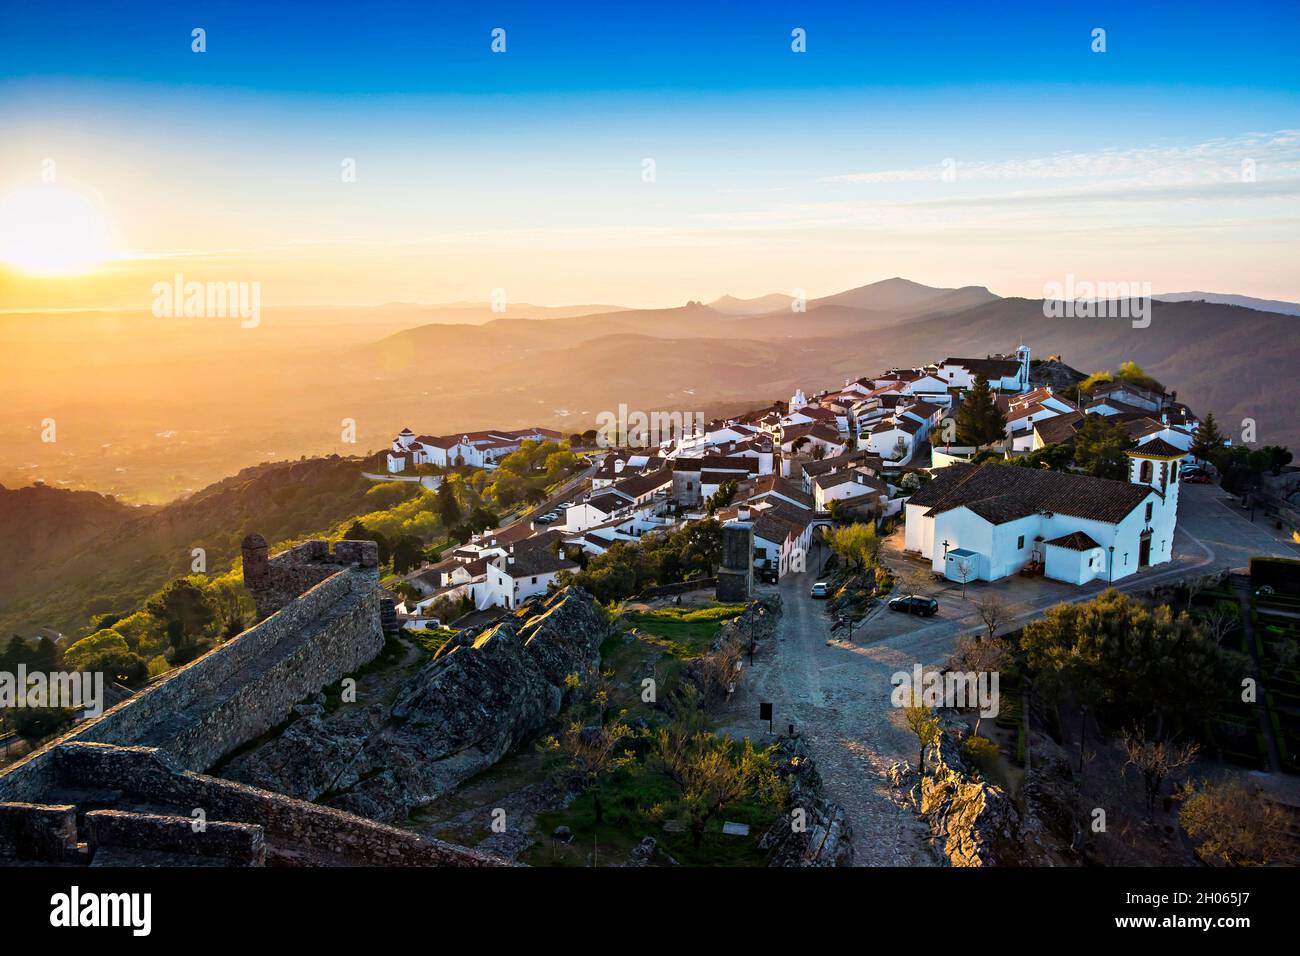 Portugal, Alto Alentejo Province: the fortified village of Marvao Stock Photo